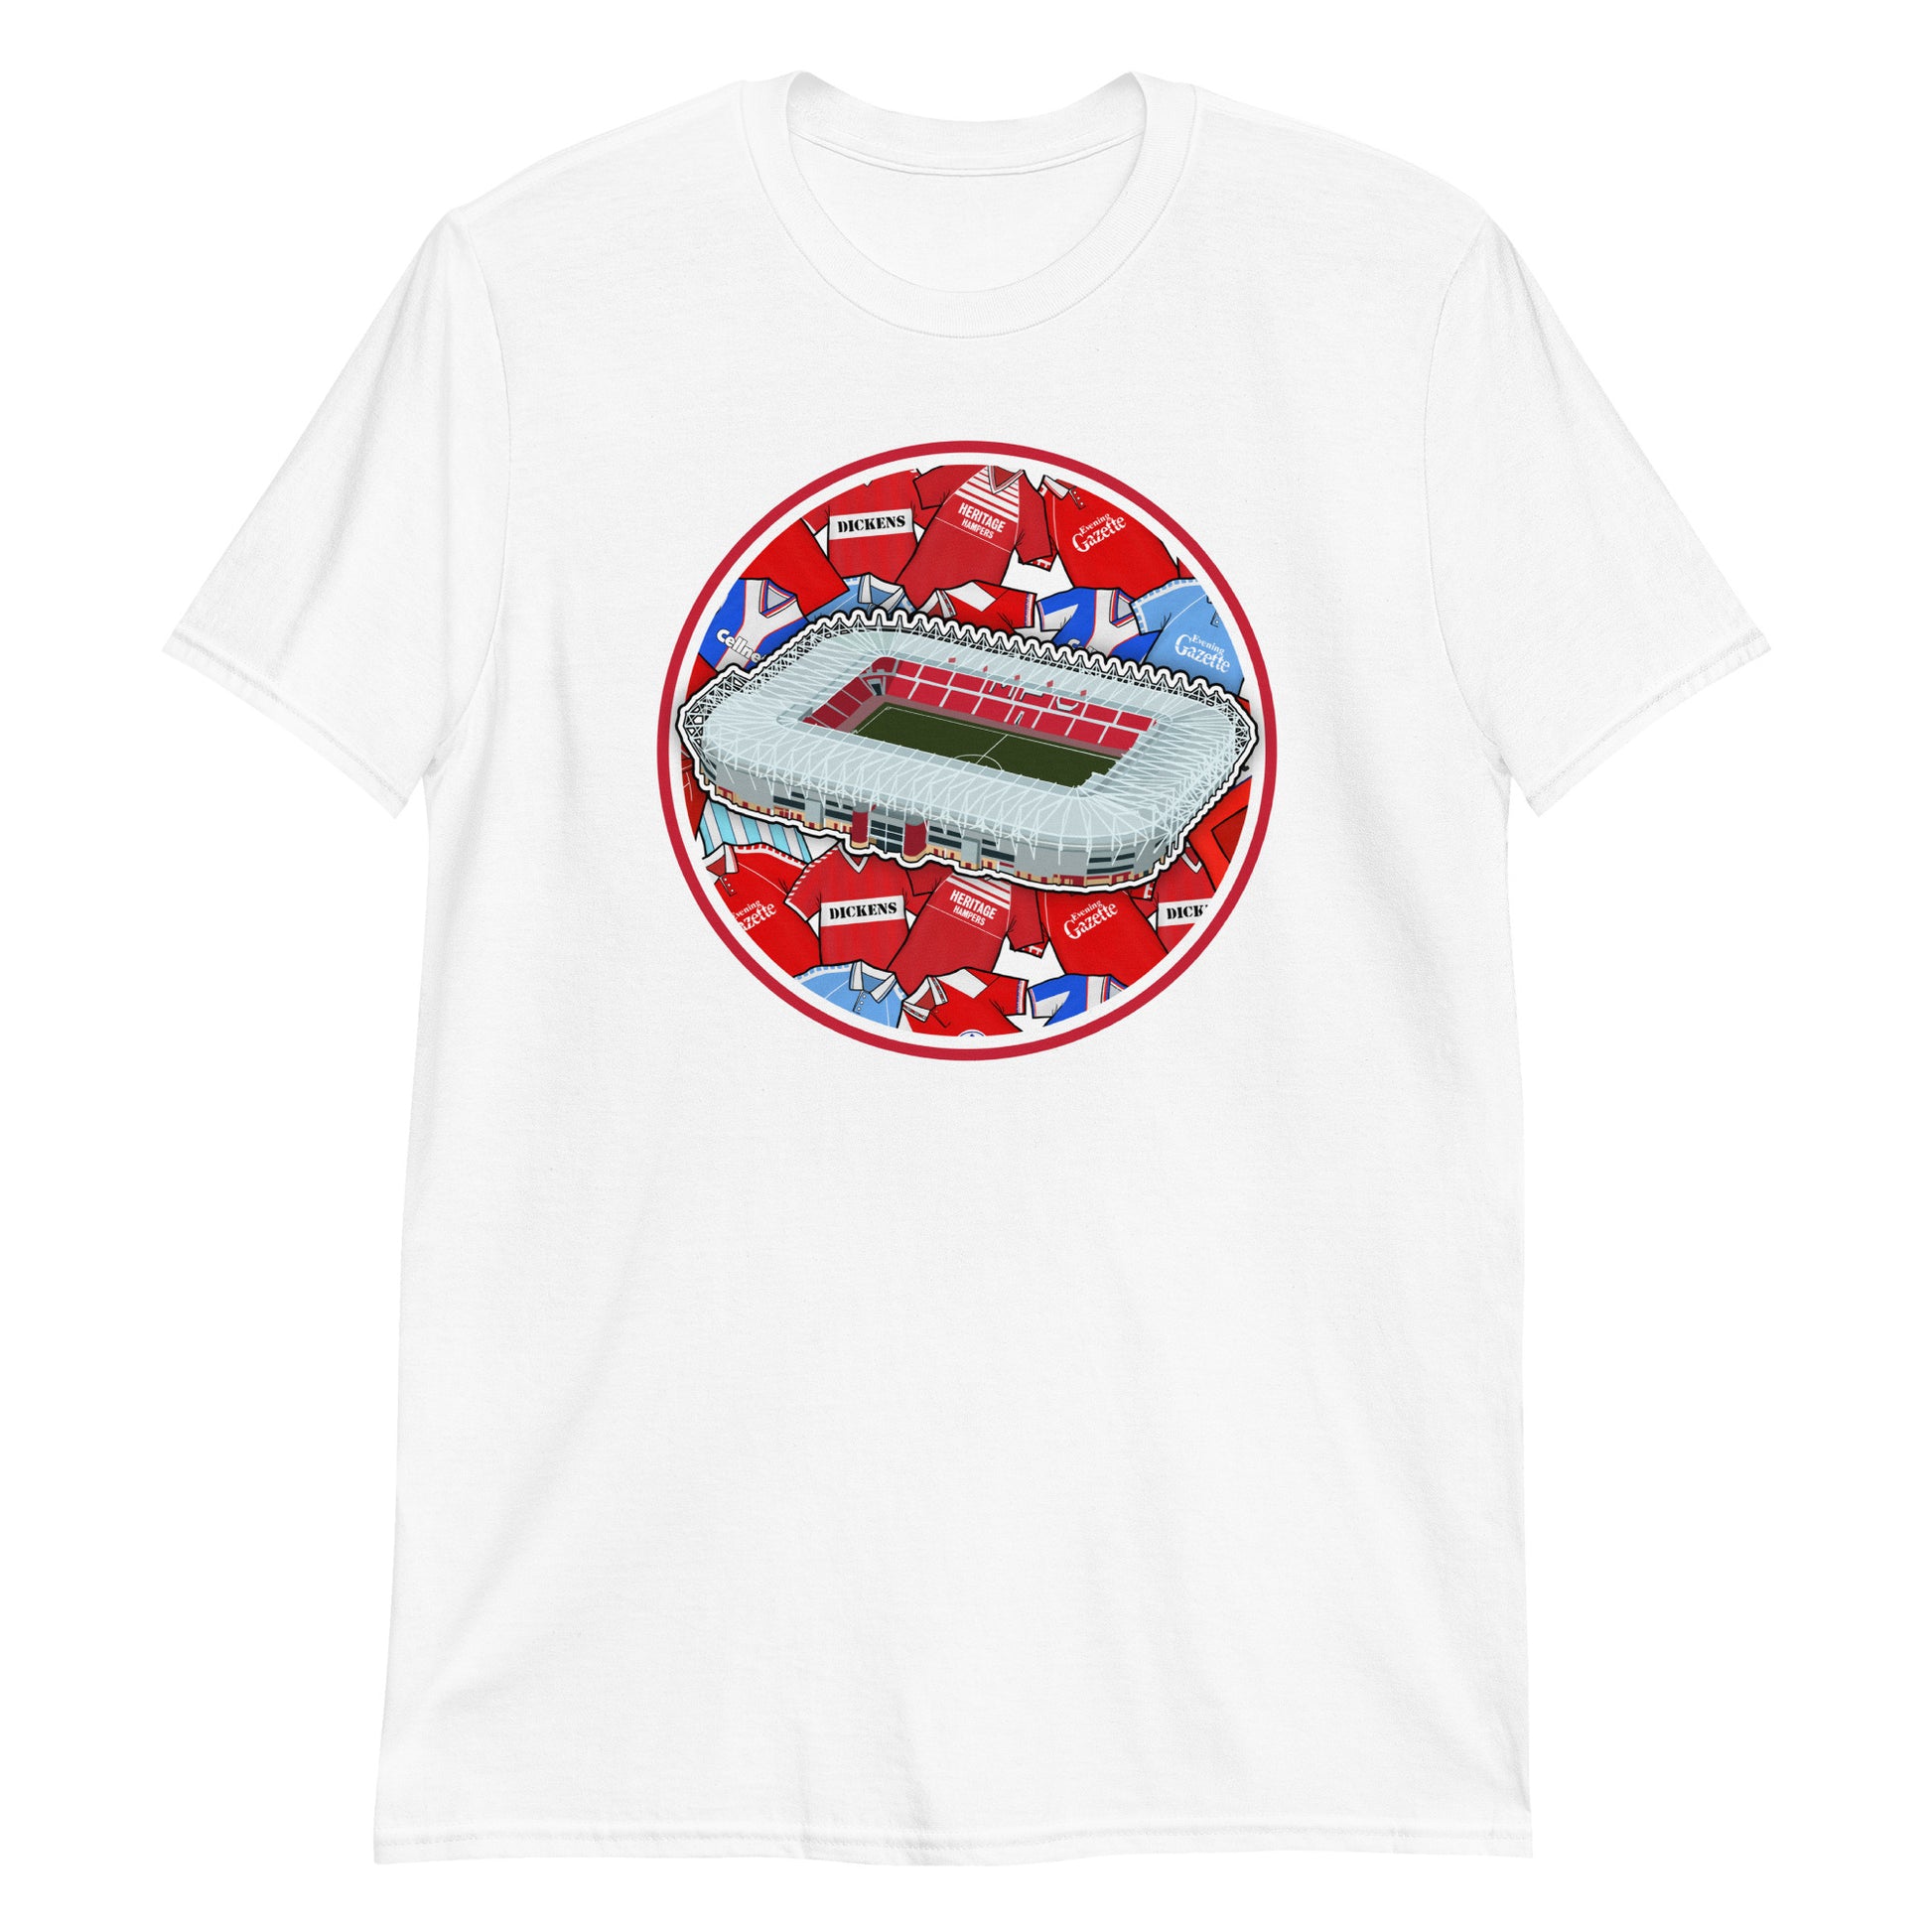 White Middlesbrough themed T-shirt with illustrated retro art including the Riverside Stadium in North Yorkshire